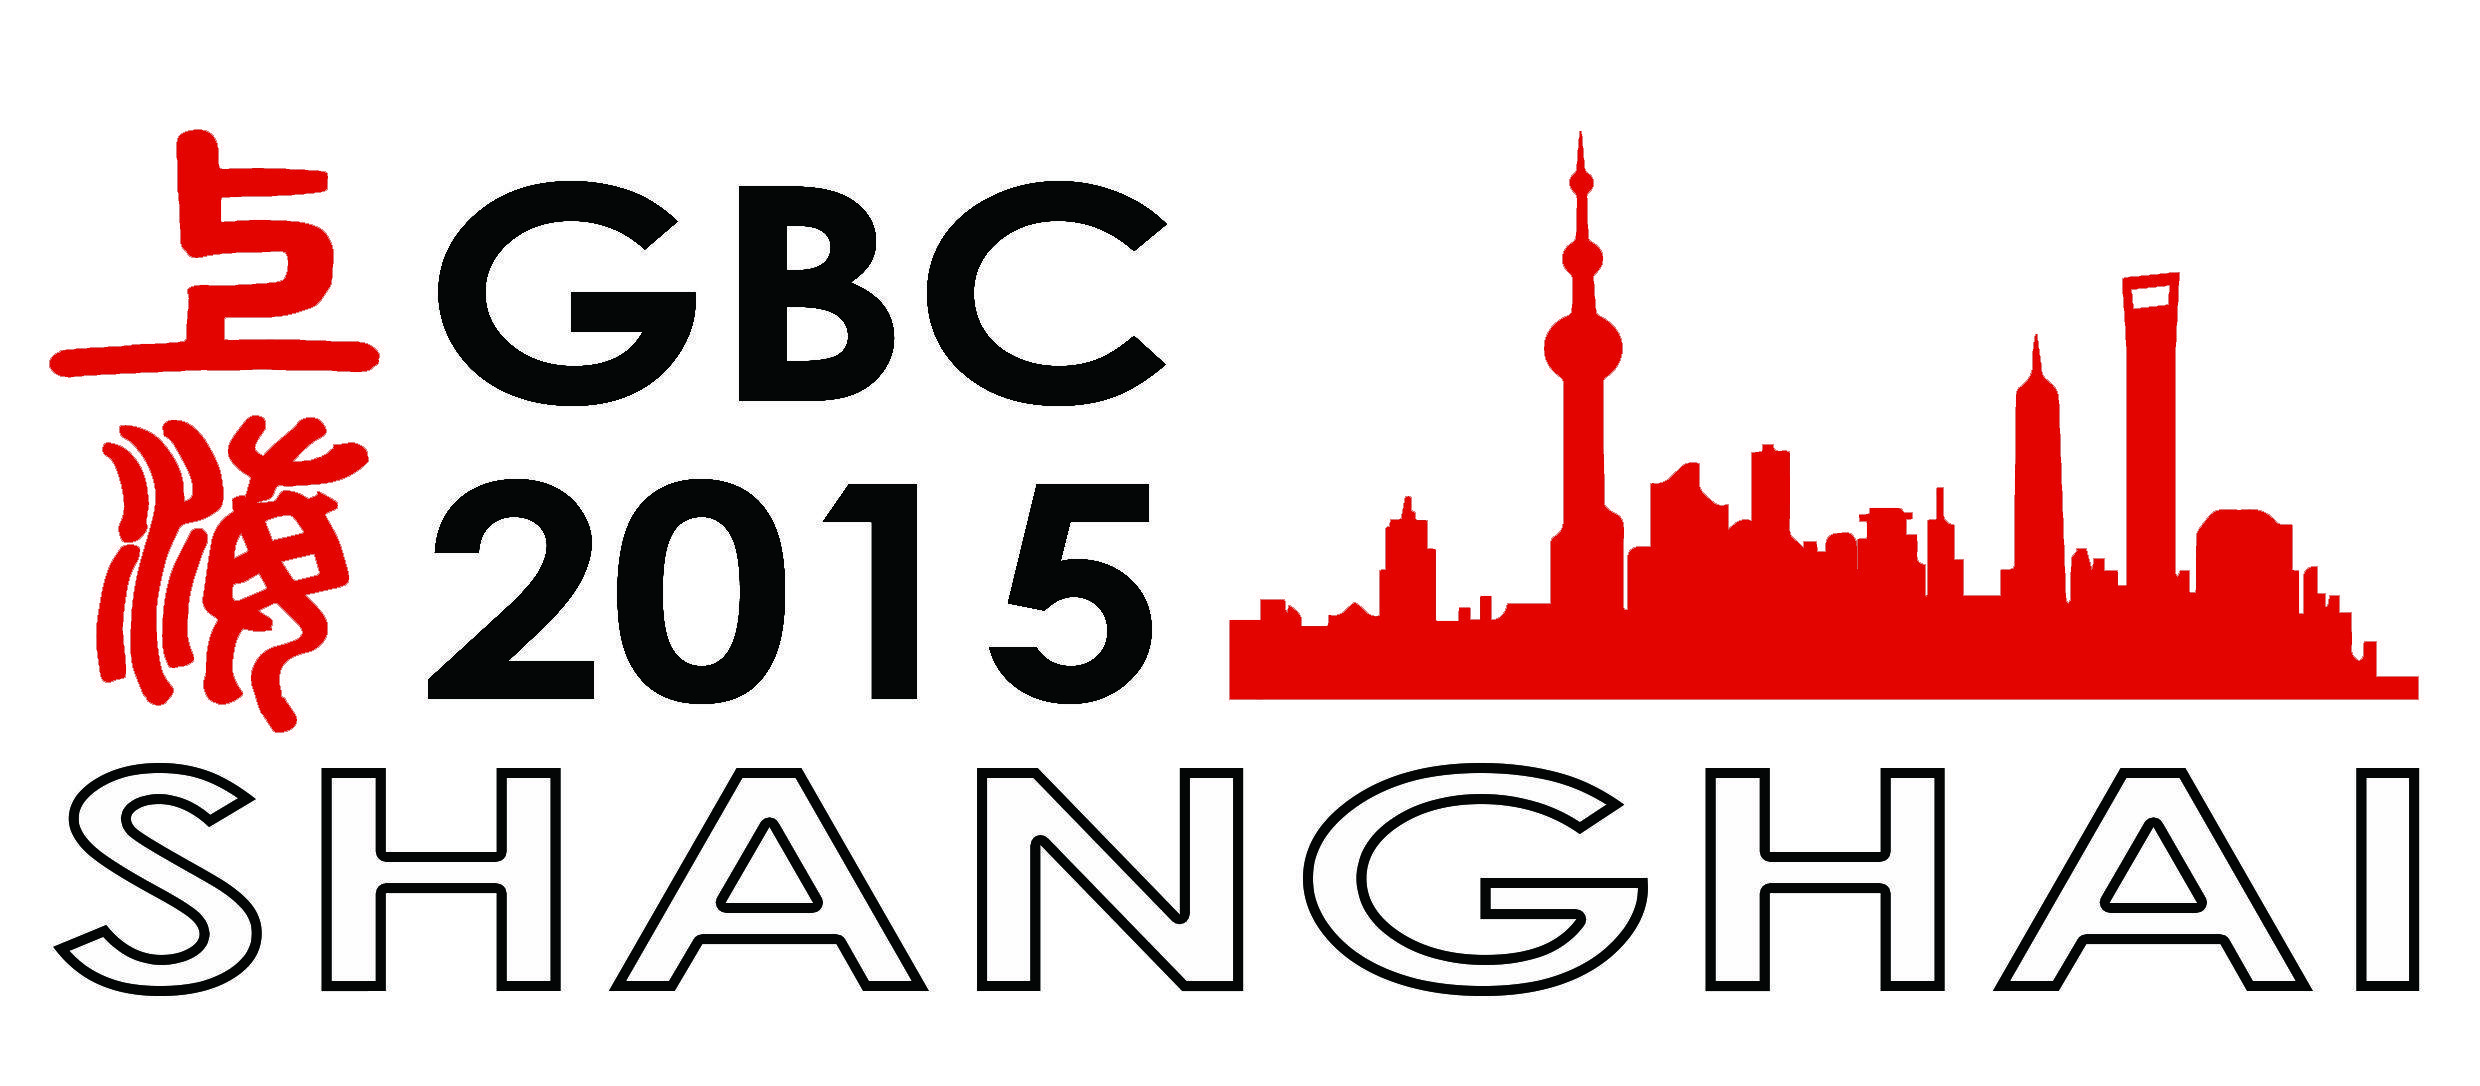 Shanghai Logo - CEIBS in Shanghai will host the Graduate Business Conference 2015